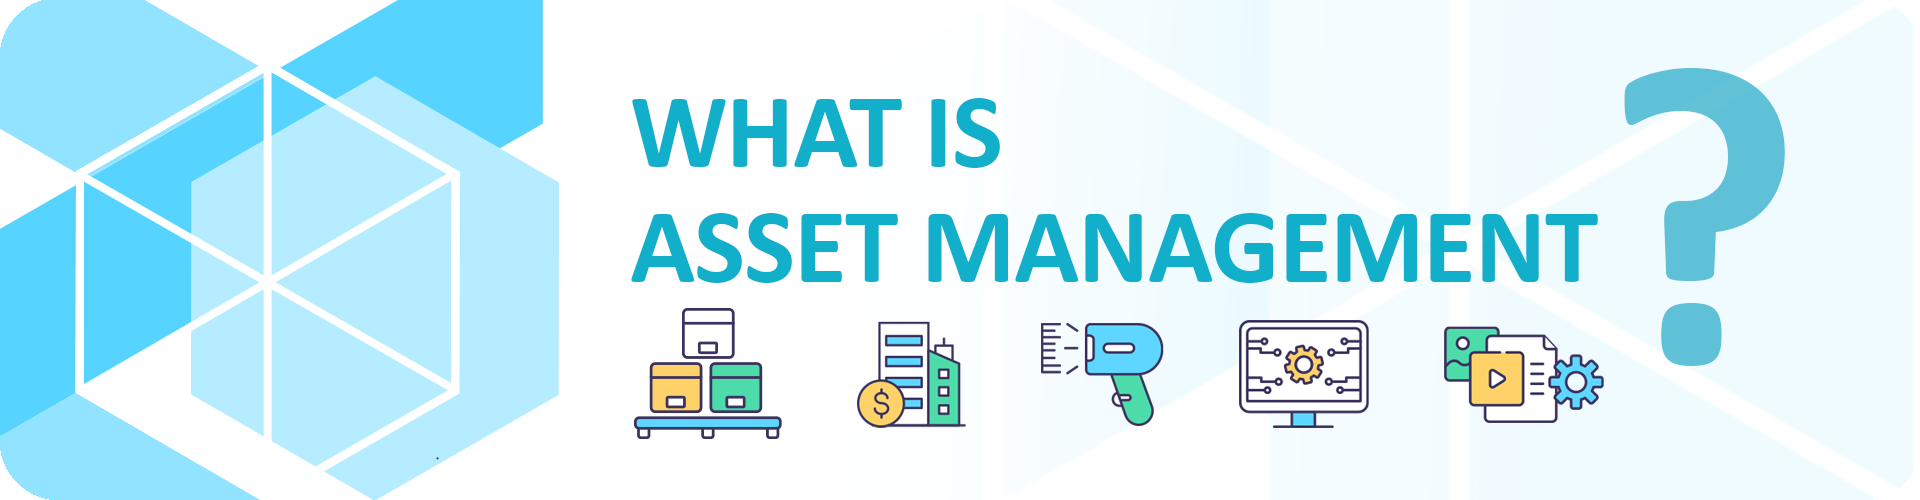 what is asset management banner